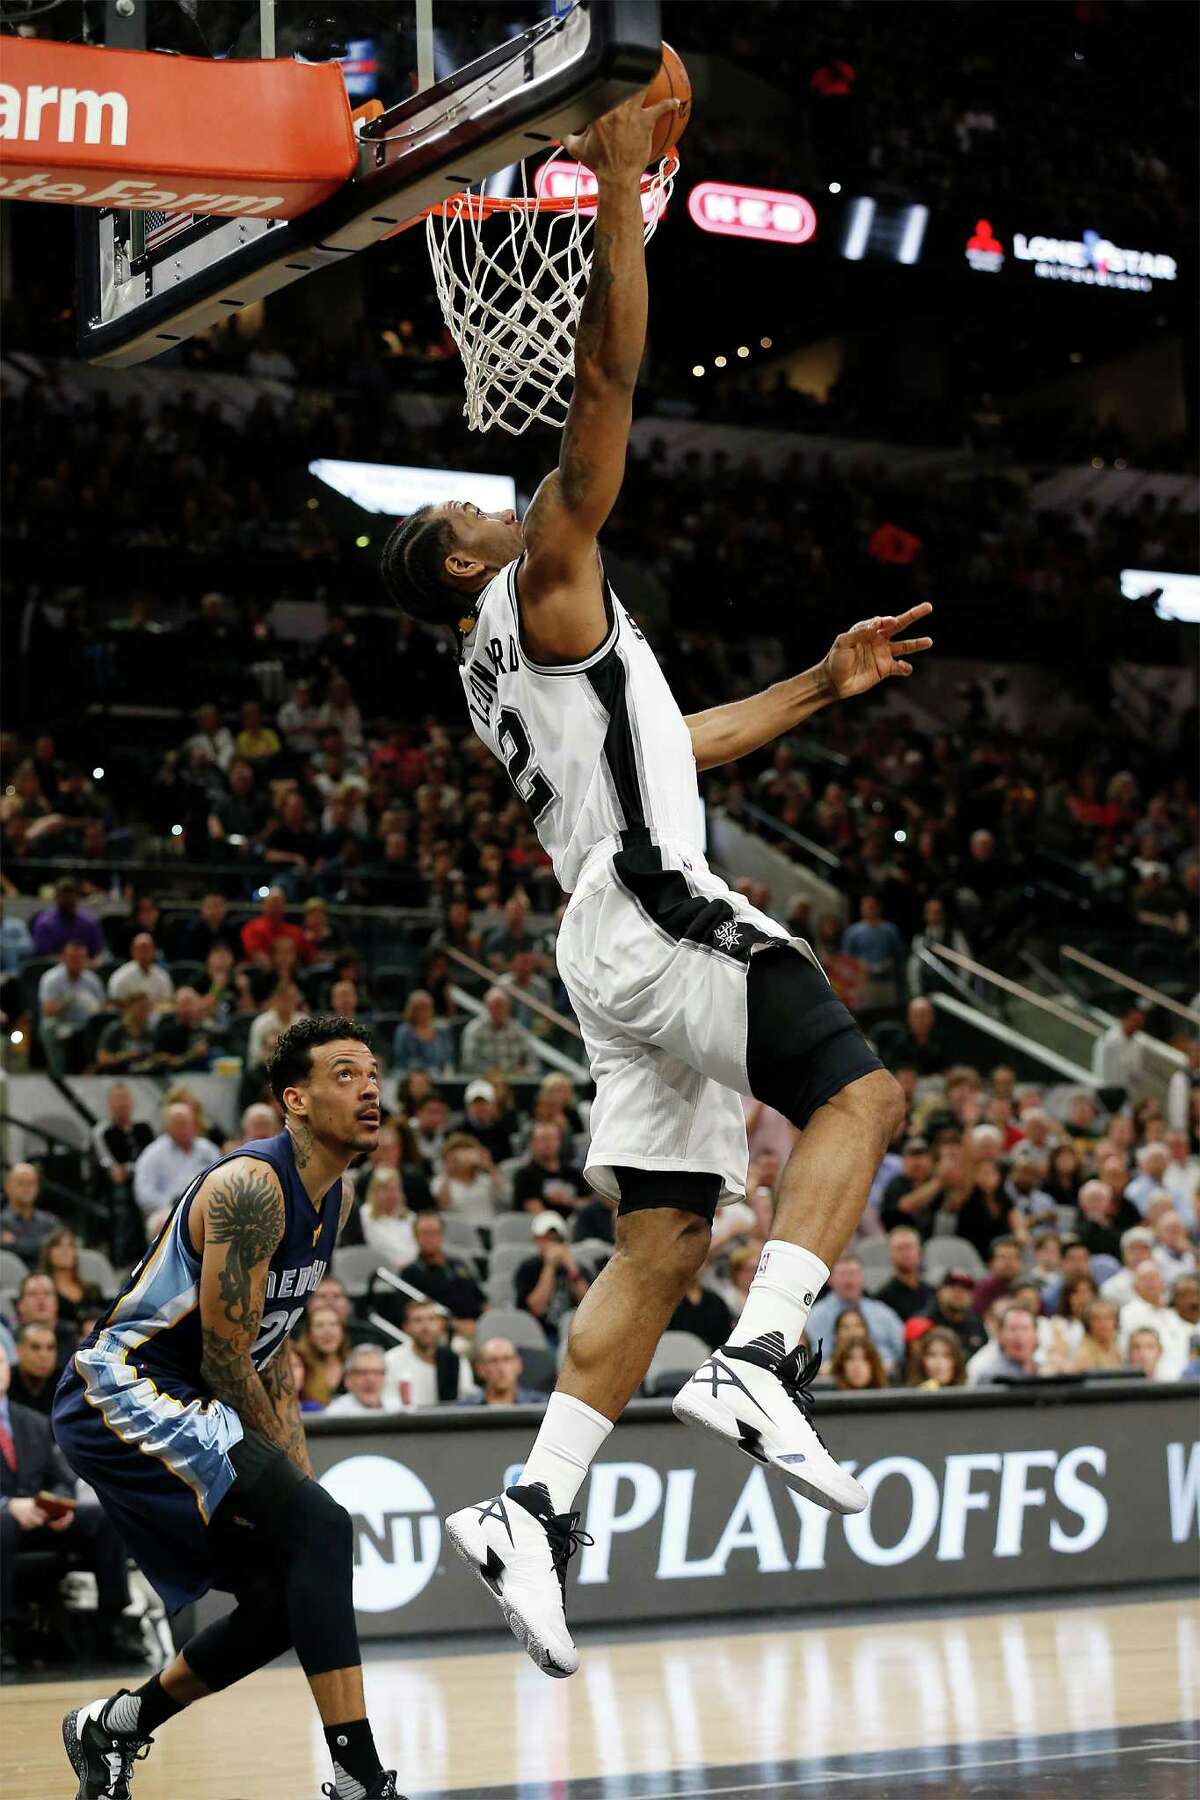 Spurs' Kawhi Leonard (02) goes for a dunk against Memphis Grizzlies' Matt Barnes (22) at the AT&T Center in Game 2 of the first round of Western Conference playoffs on Tuesday, Apr. 19, 2016. (Kin Man Hui/San Antonio Express-News)